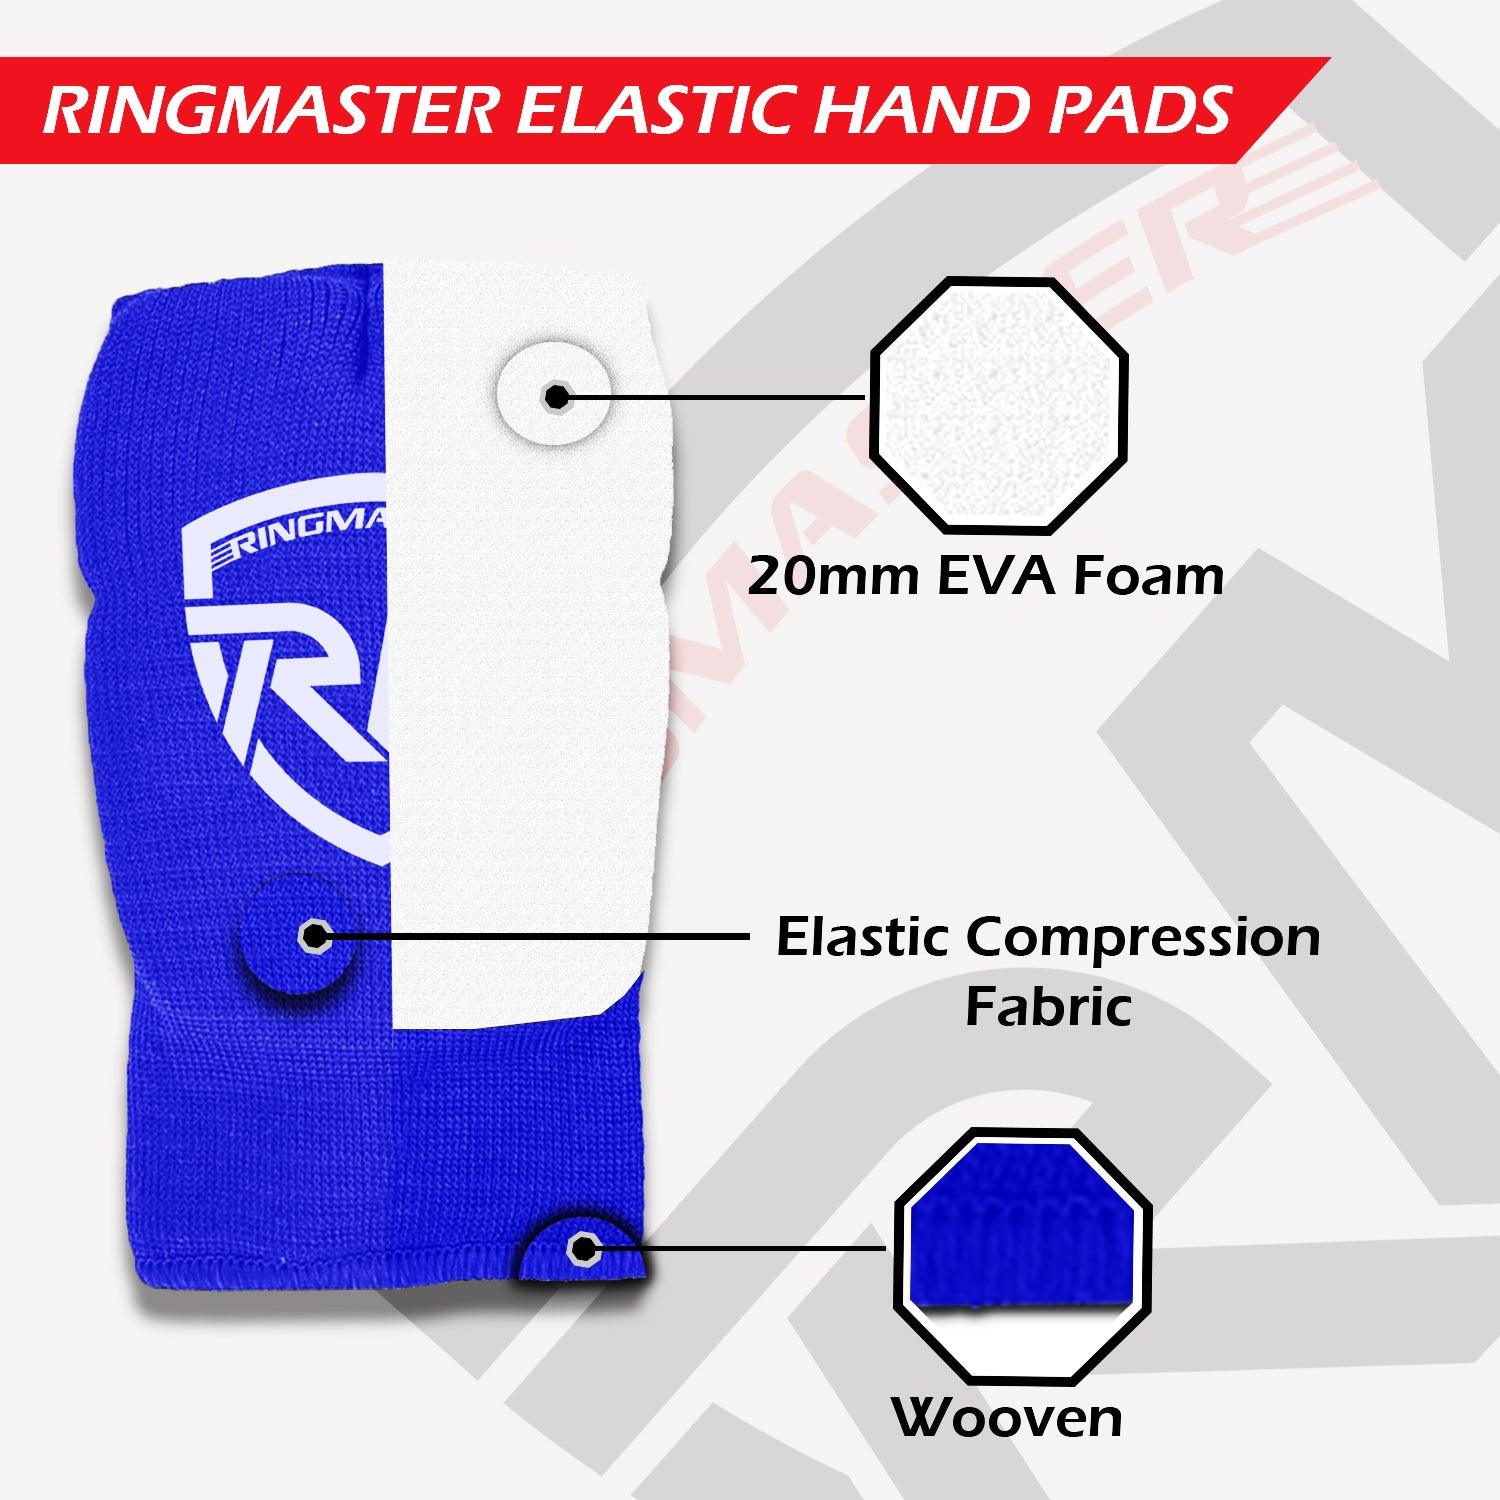 RingMaster Sports Slip on Elastic Hand Pads Mitts Blue - RINGMASTER SPORTS - Made For Champions